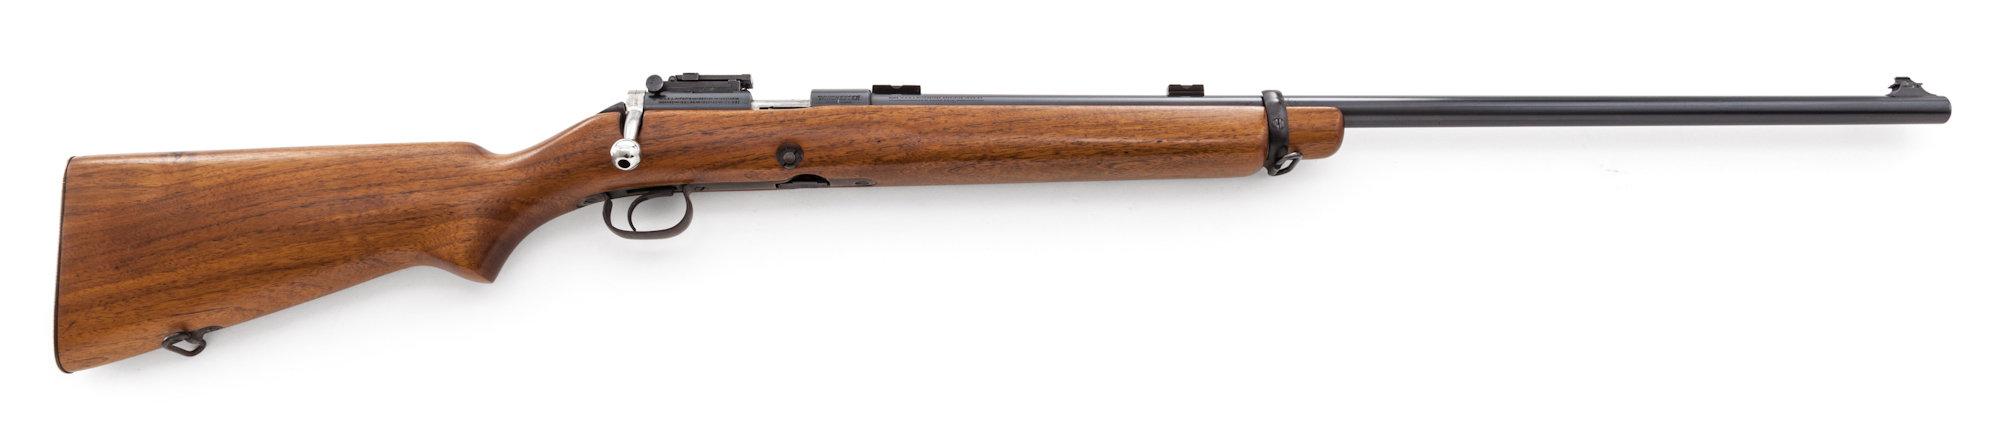 1930s Winchester Model 52 Bolt Action Rifle